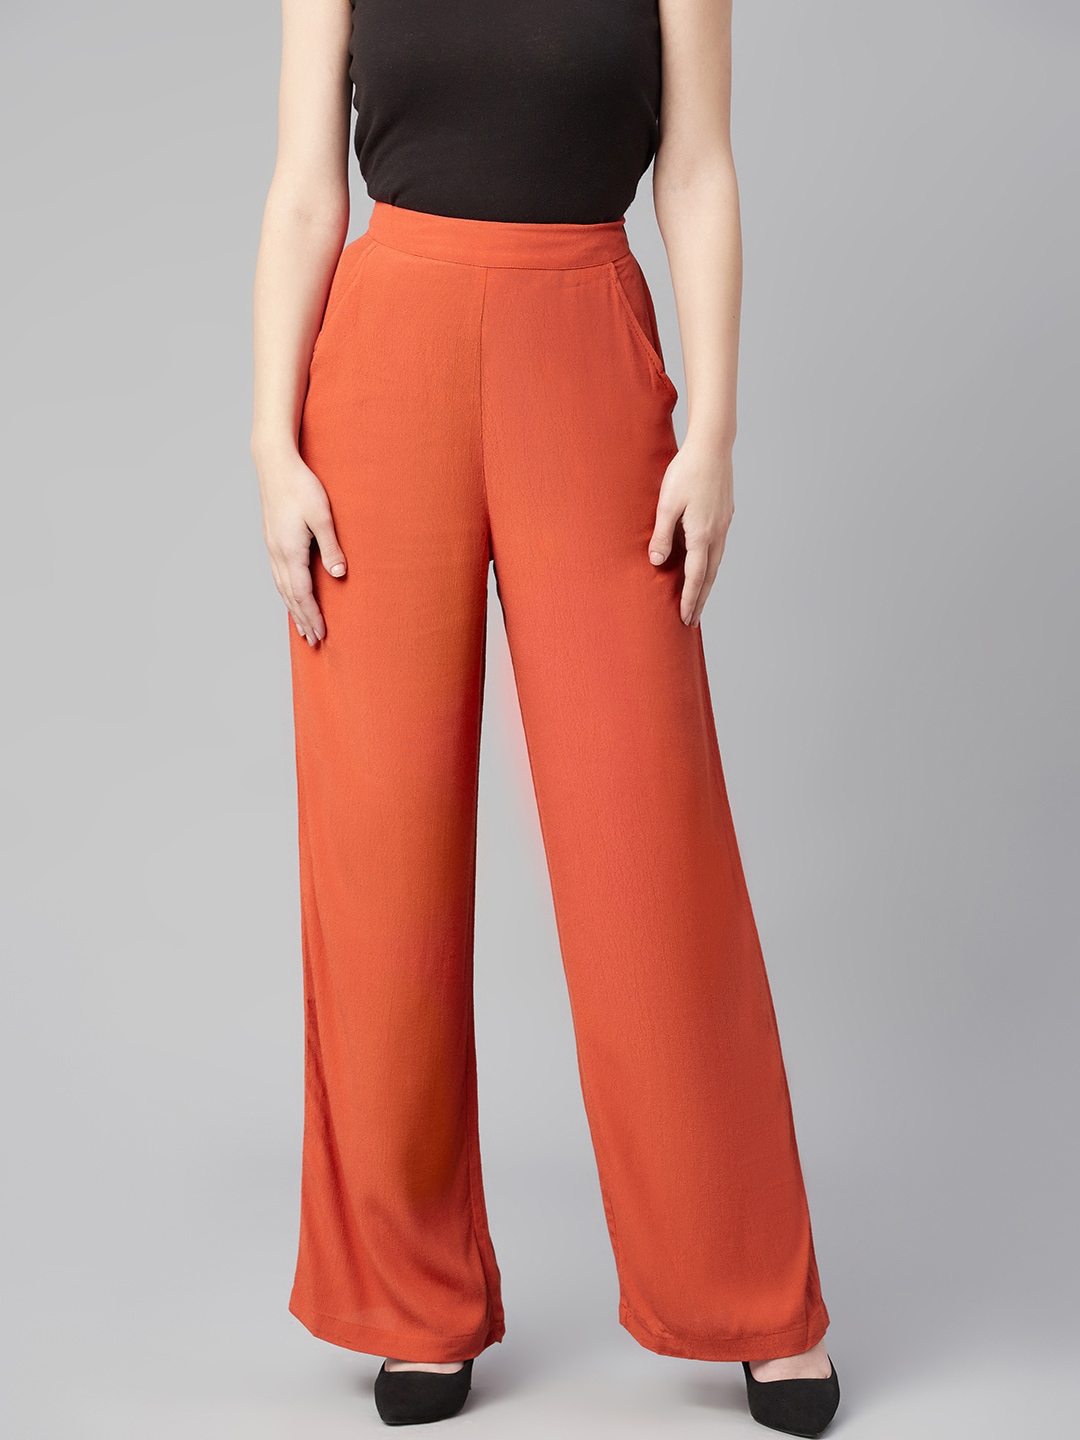 Marks & Spencer Women Rust Orange Solid Trousers Price in India